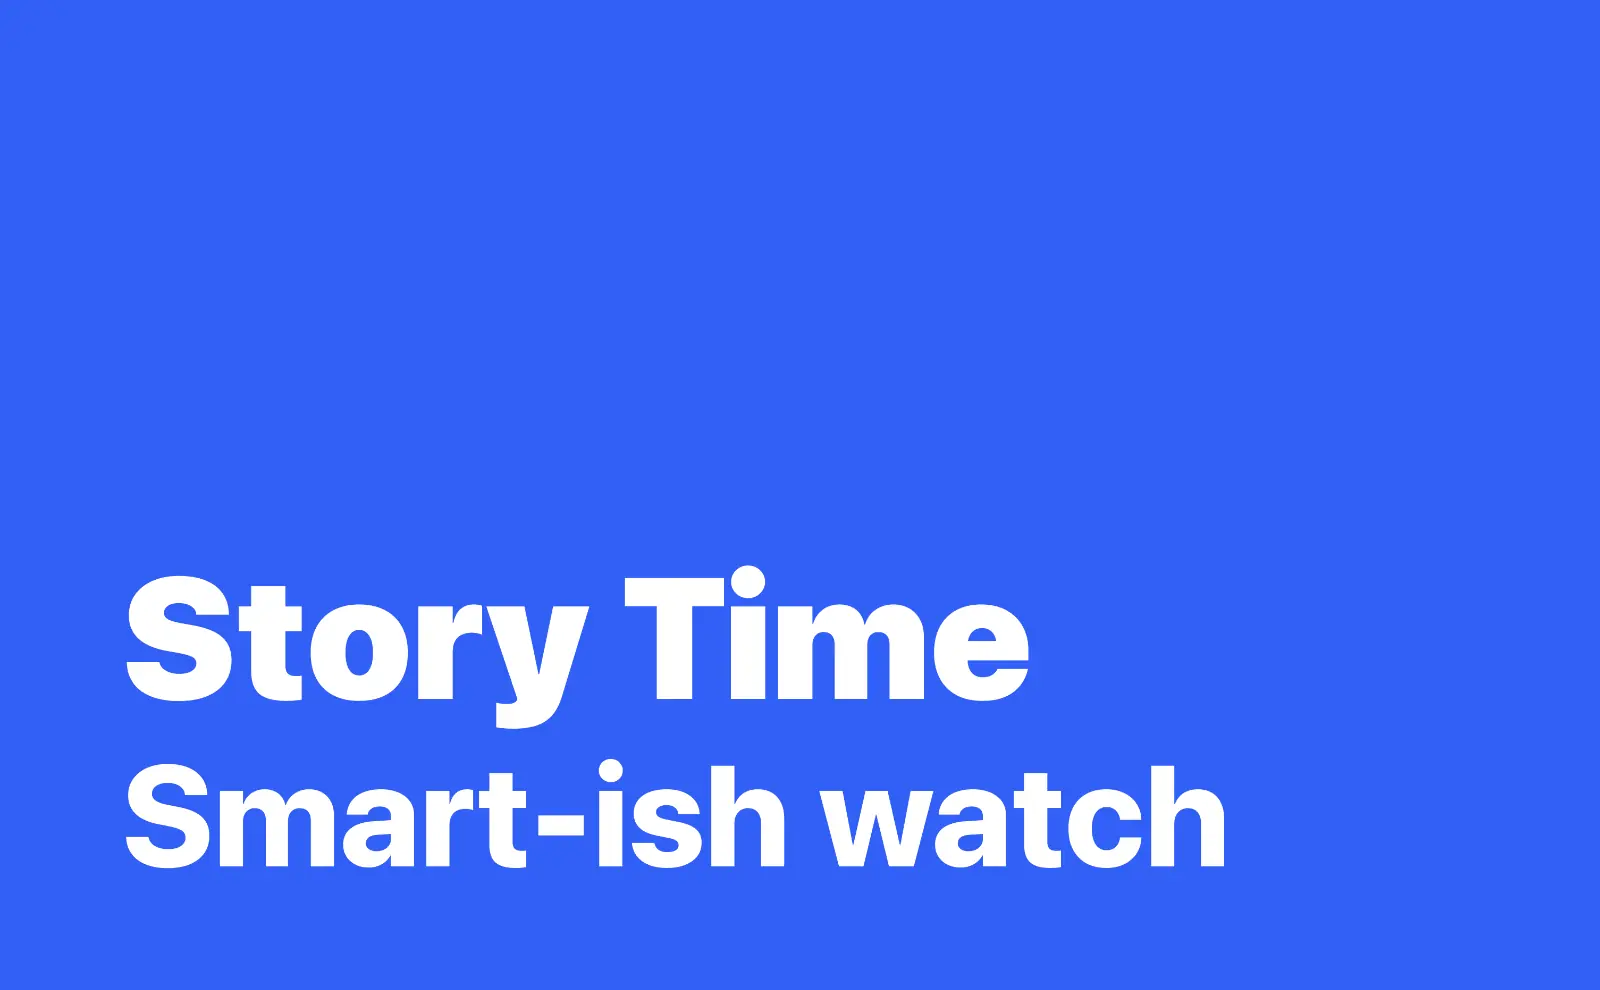 Story time: smart-ish watch